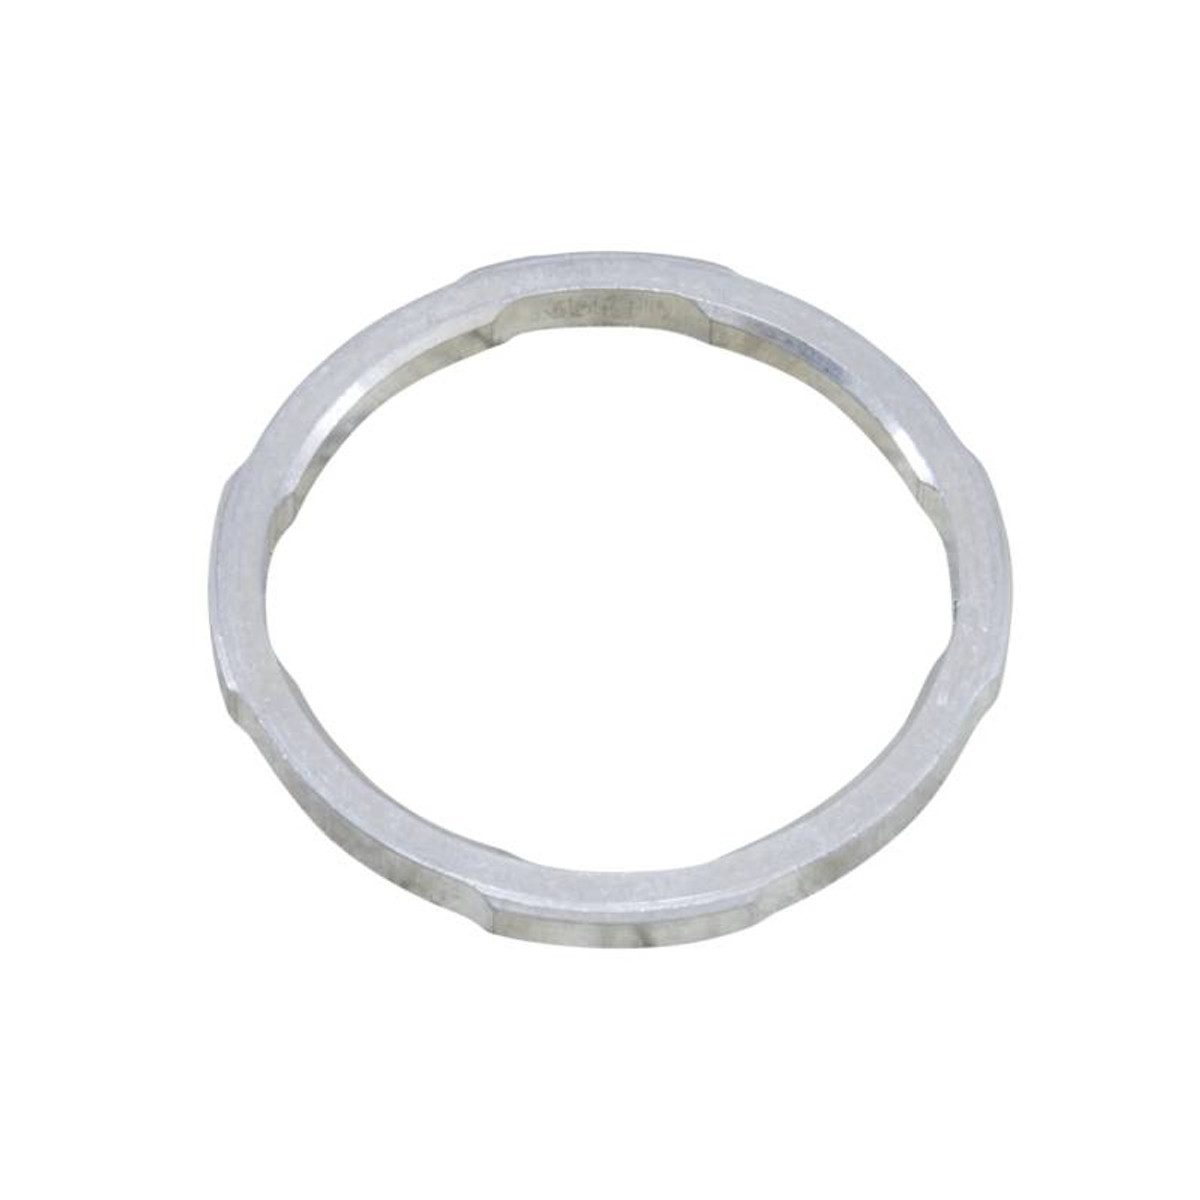 Gm 8.25 Inch IFS Side Bearing Adjuster Lock Ring 07 And Up YSPSA-011